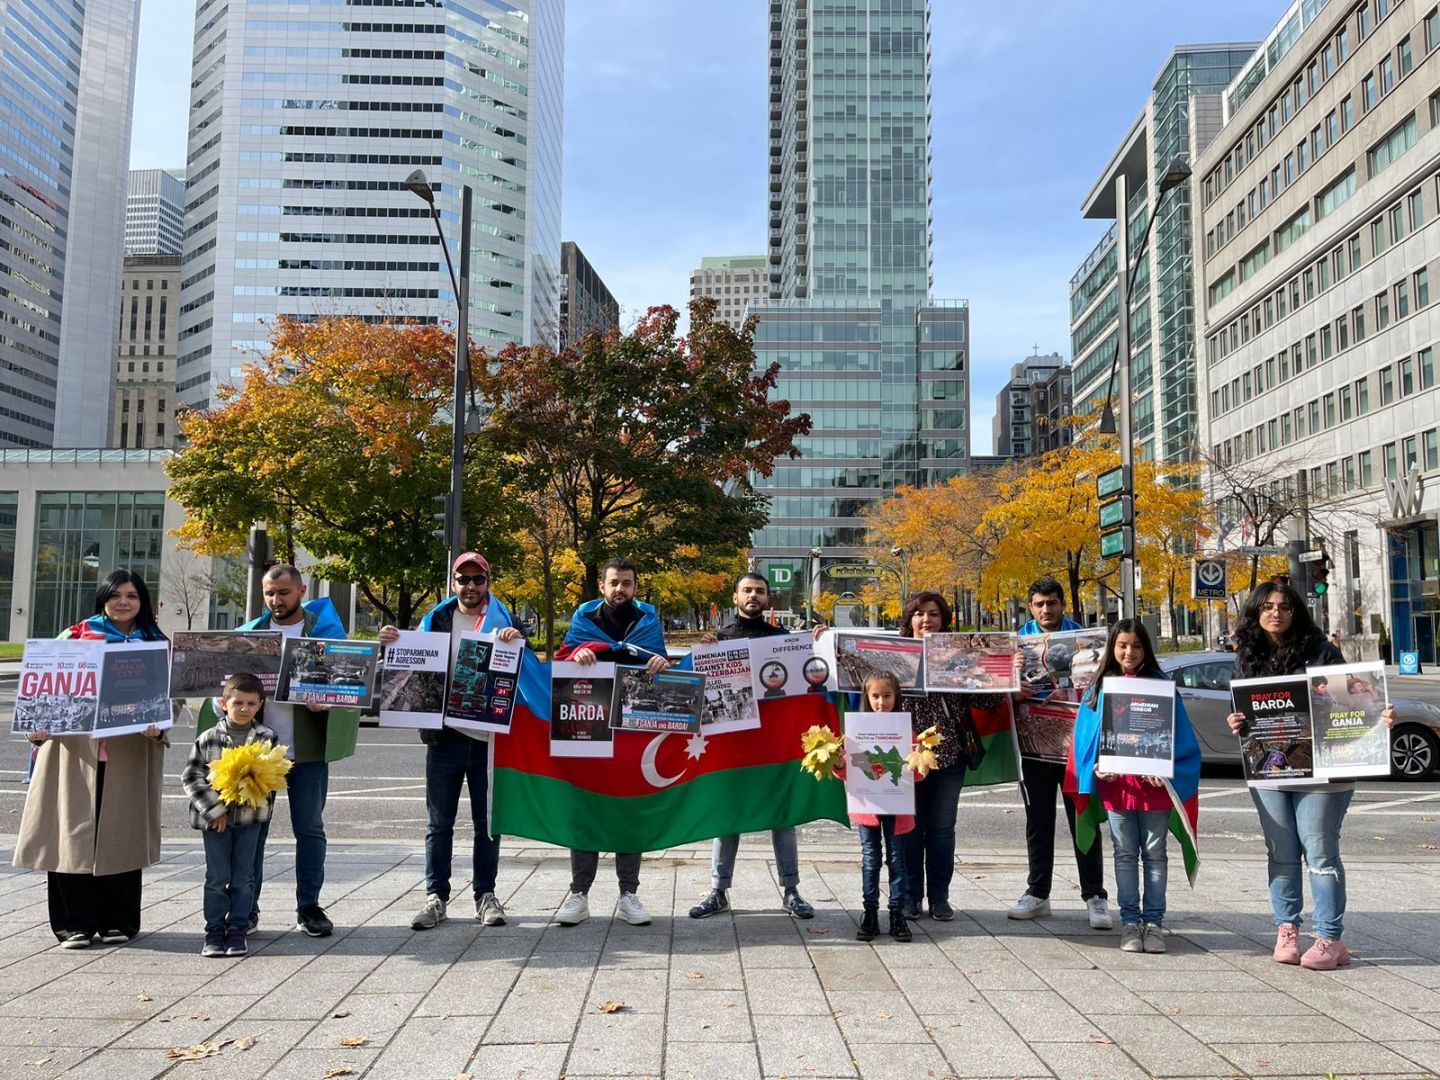 Azerbaijan holds information campaign on Armenian war crimes in Montreal [PHOTO]